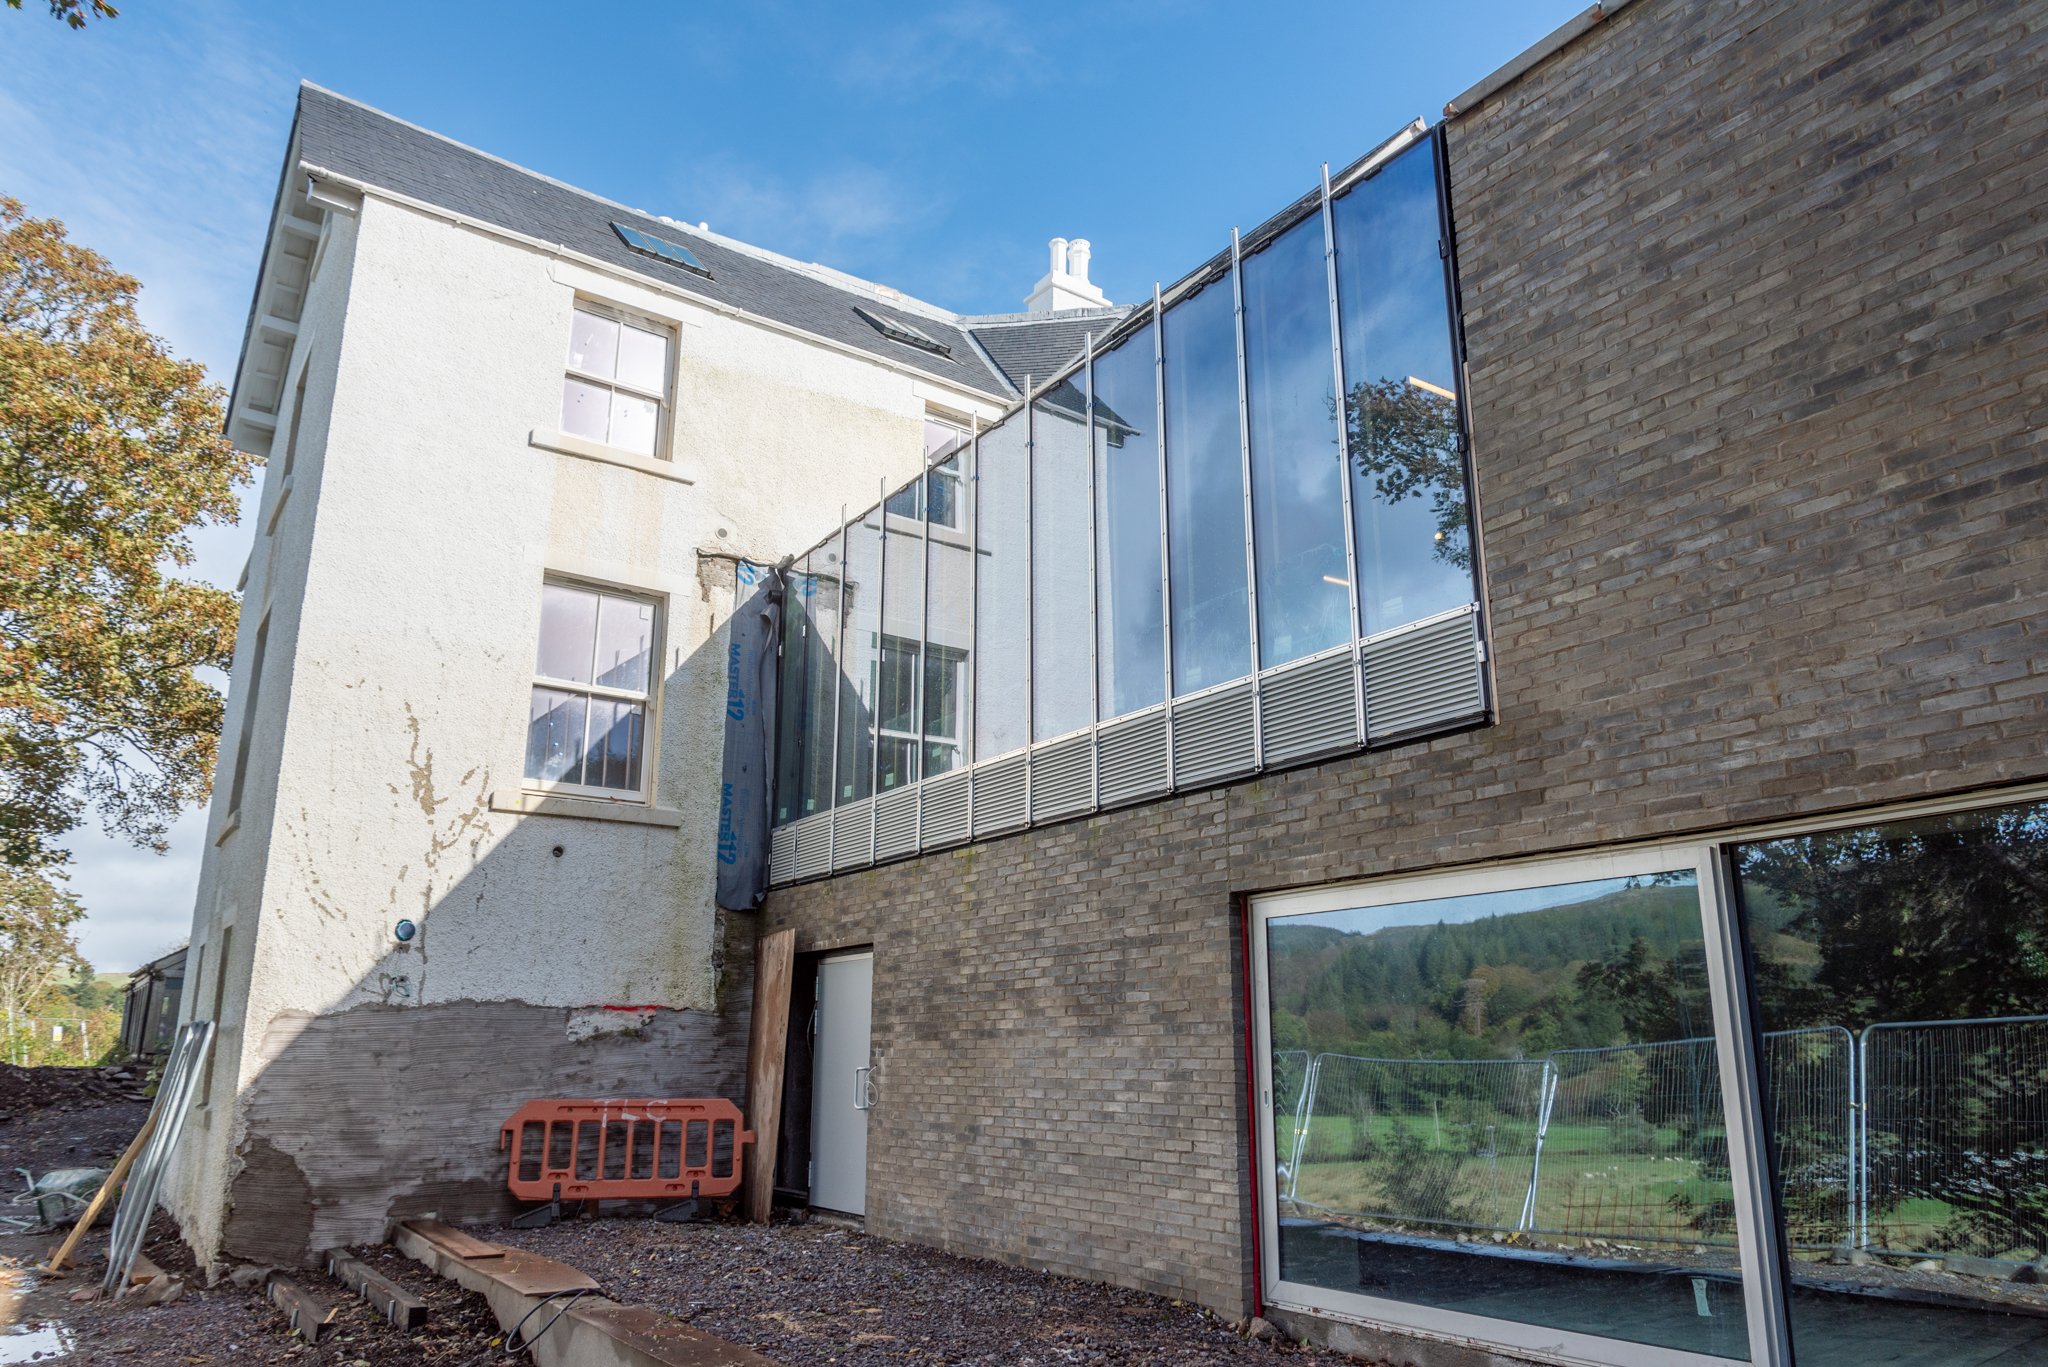  The windows of the ground floor Learning space and the principle Exhibition reflect the sky and the landscape. 